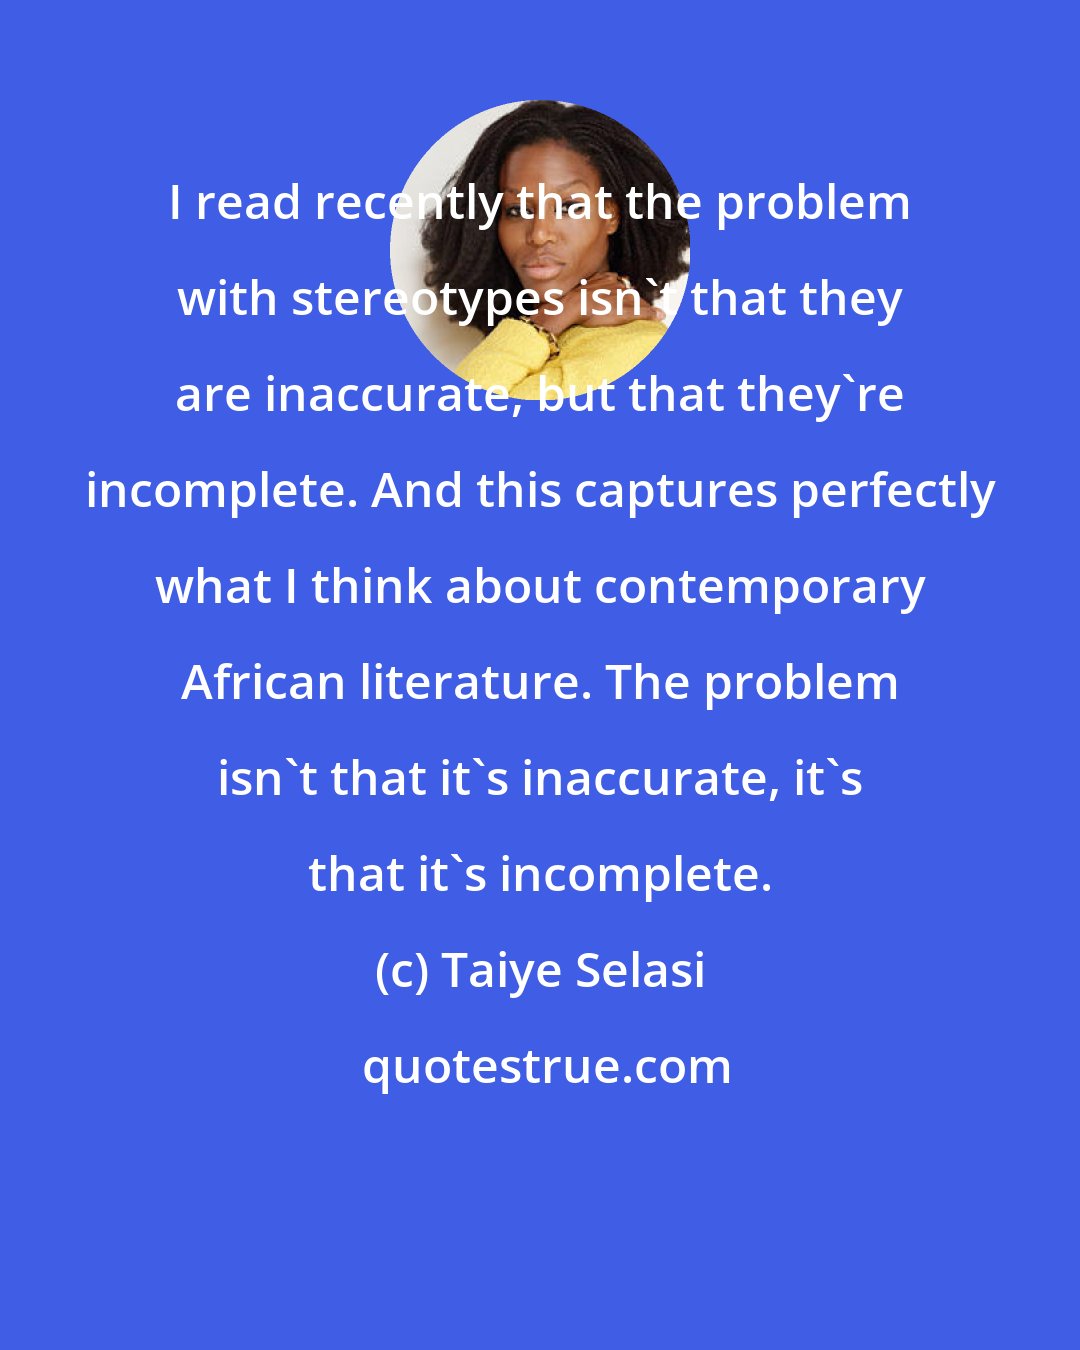 Taiye Selasi: I read recently that the problem with stereotypes isn't that they are inaccurate, but that they're incomplete. And this captures perfectly what I think about contemporary African literature. The problem isn't that it's inaccurate, it's that it's incomplete.